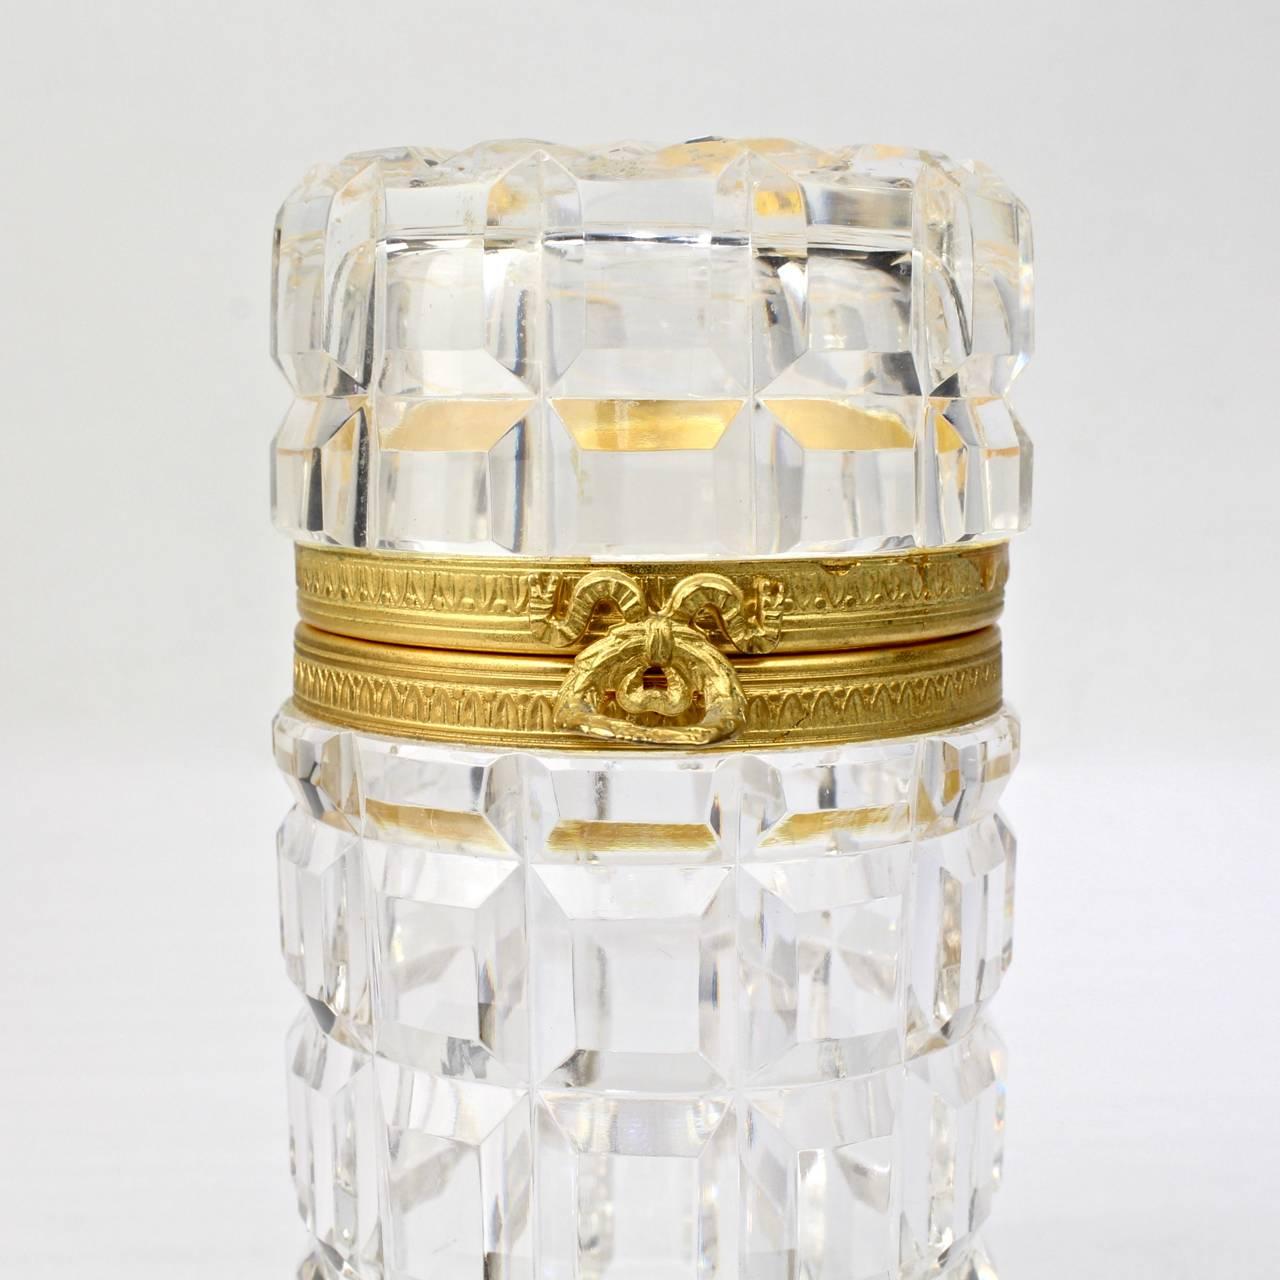 A fine, vintage French cut glass dresser or vanity box. 

Of cylindrical form with gilt bronze hinge and mounts. With a field of deep rectangular cuts around the entire body and top. 

Height: ca. 5 1/4

Items purchased from David Sterner